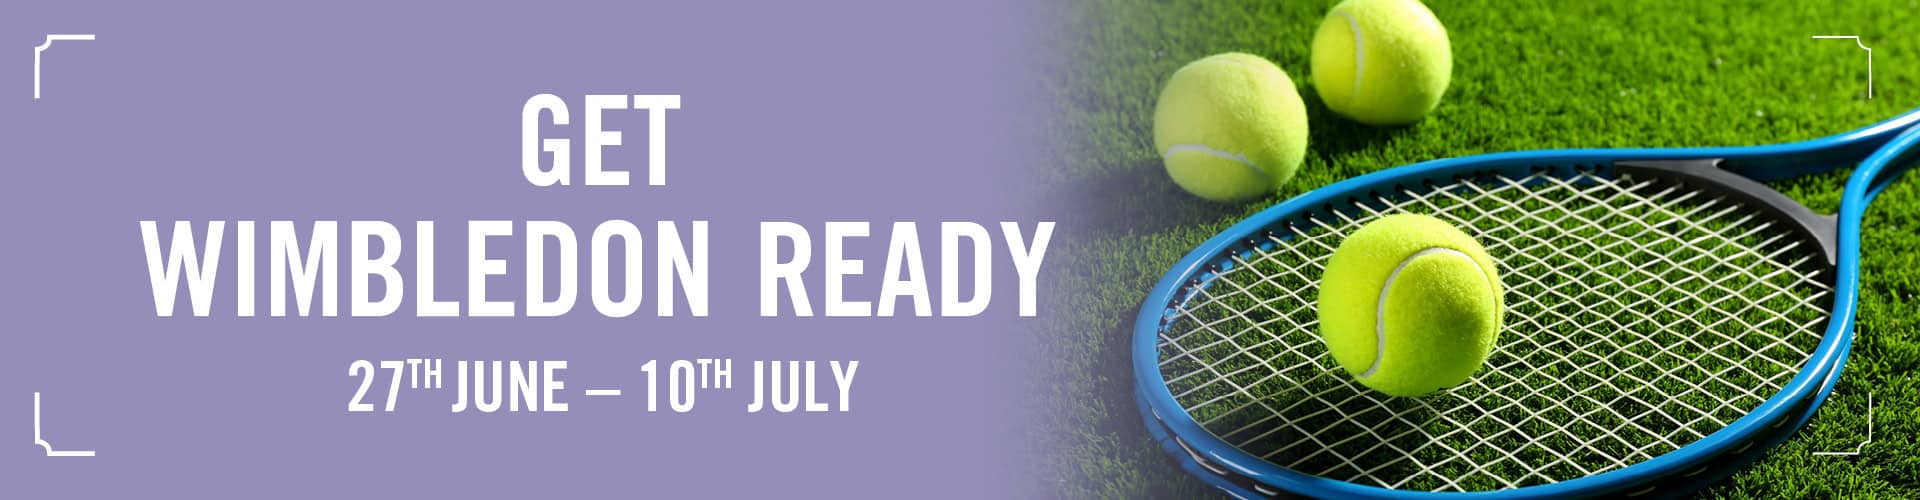 Pubs in London showing Wimbledon live | Henry's Cafe Bar - Piccadilly